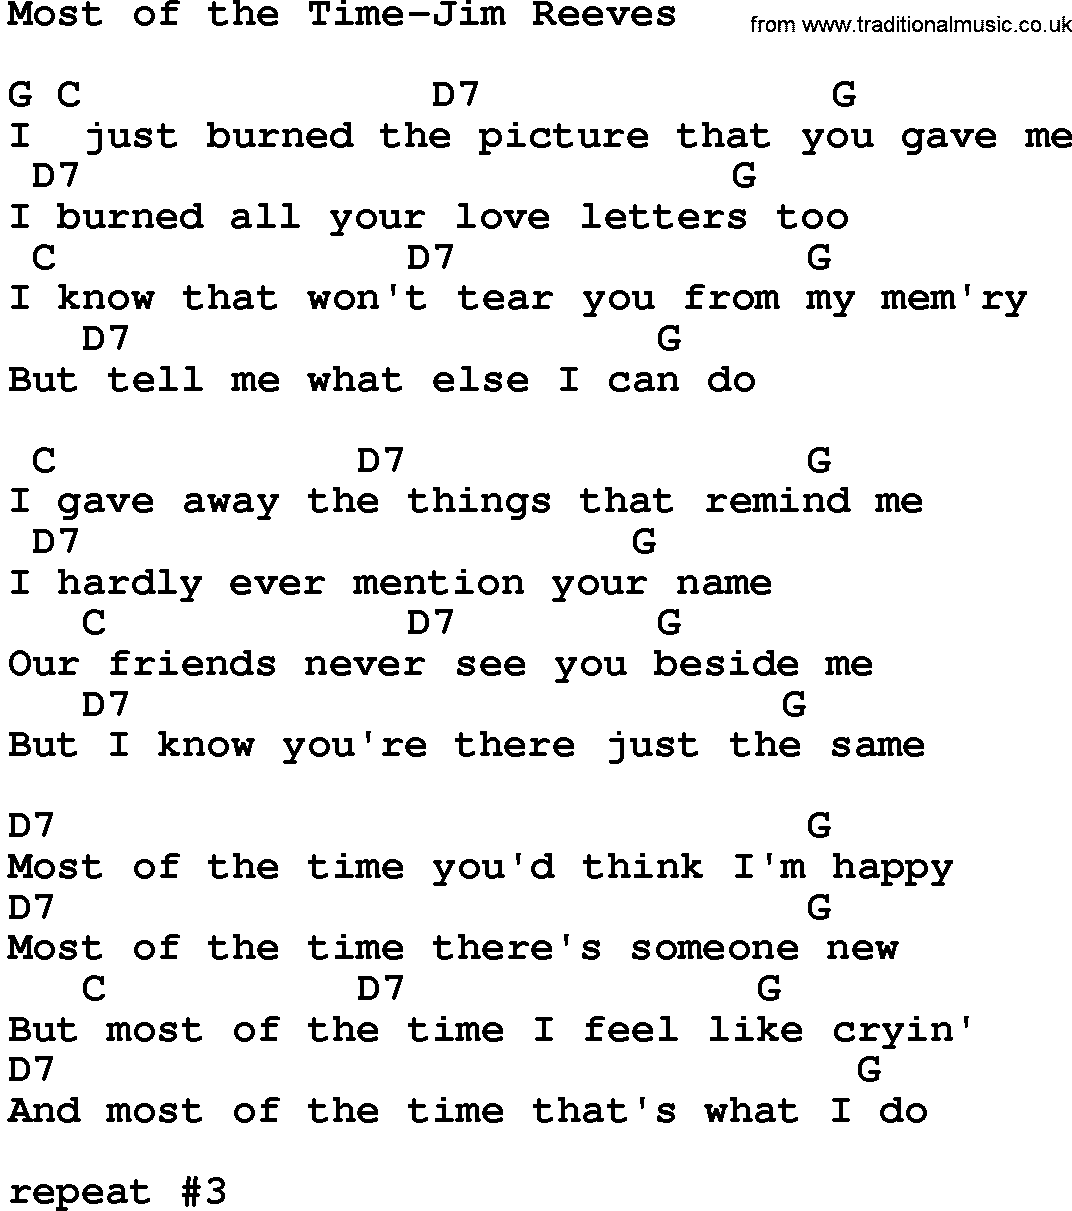 Country music song: Most Of The Time-Jim Reeves lyrics and chords